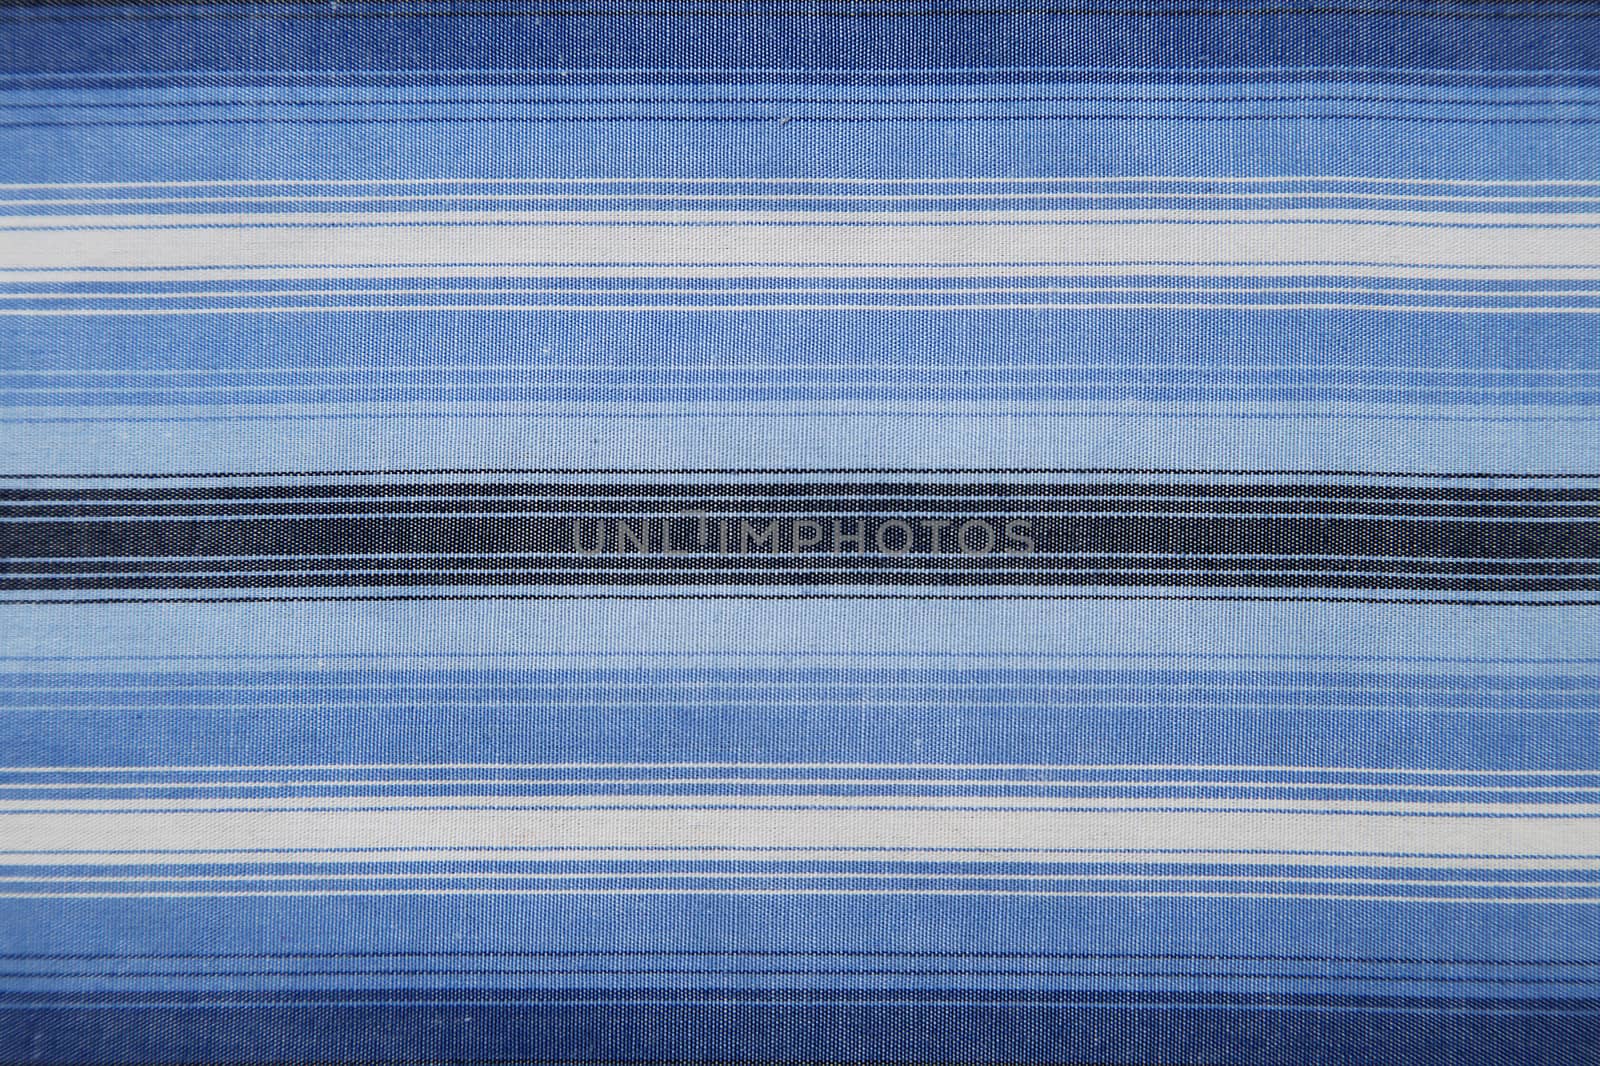 Close-up of a piece of blue and white striped fabric